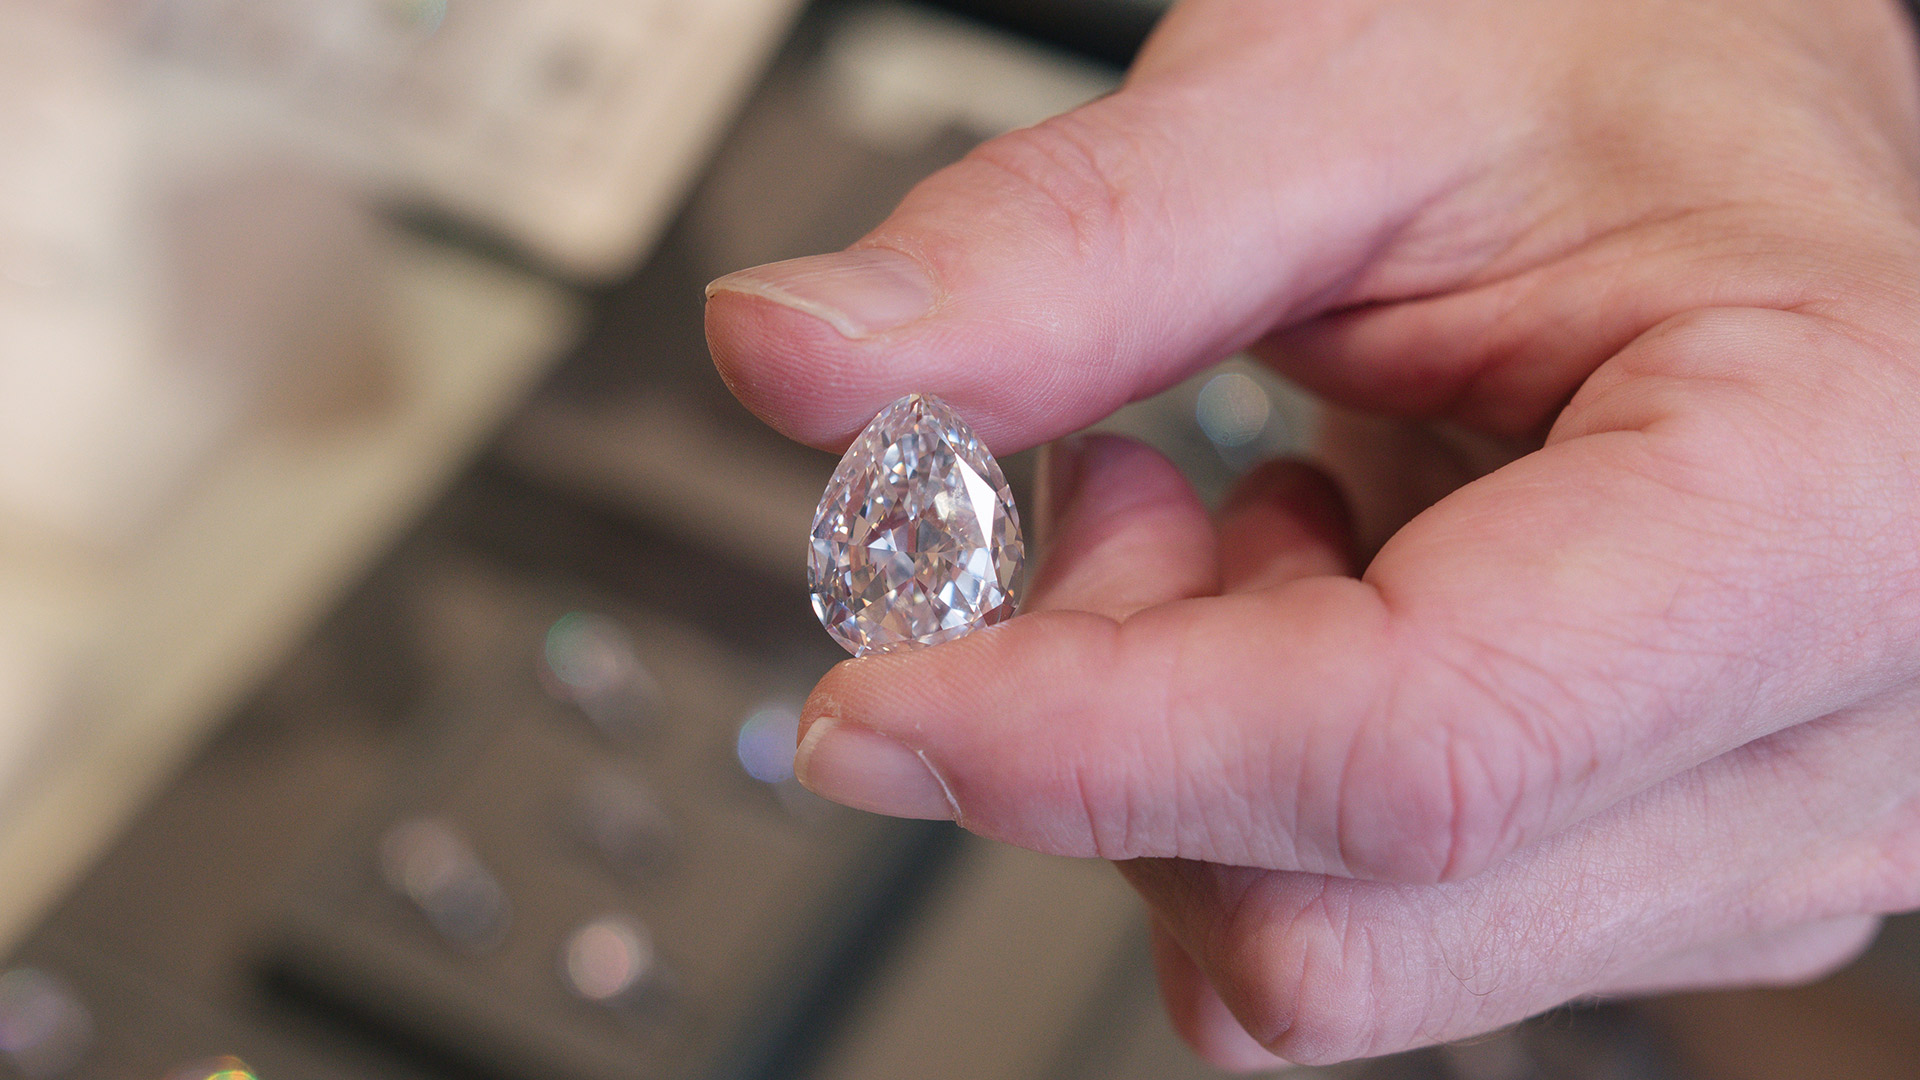 Diamond Clarity Scale - Understanding The Various Levels Of Diamond Clarity And How To Judge Them